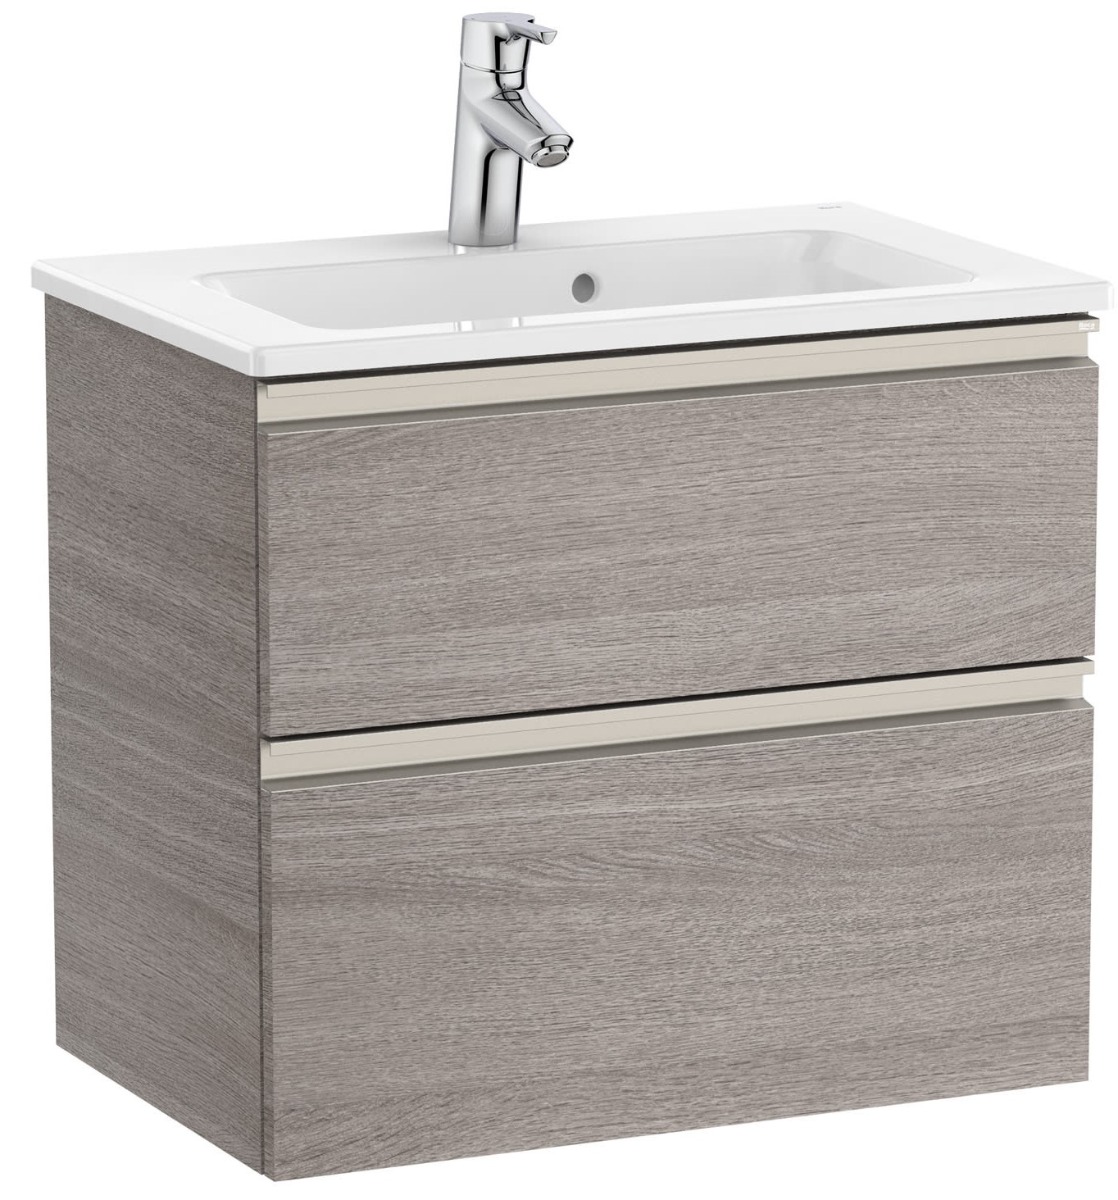 Unik (compact base unit with two drawers and basin)-402 - CITY OAK